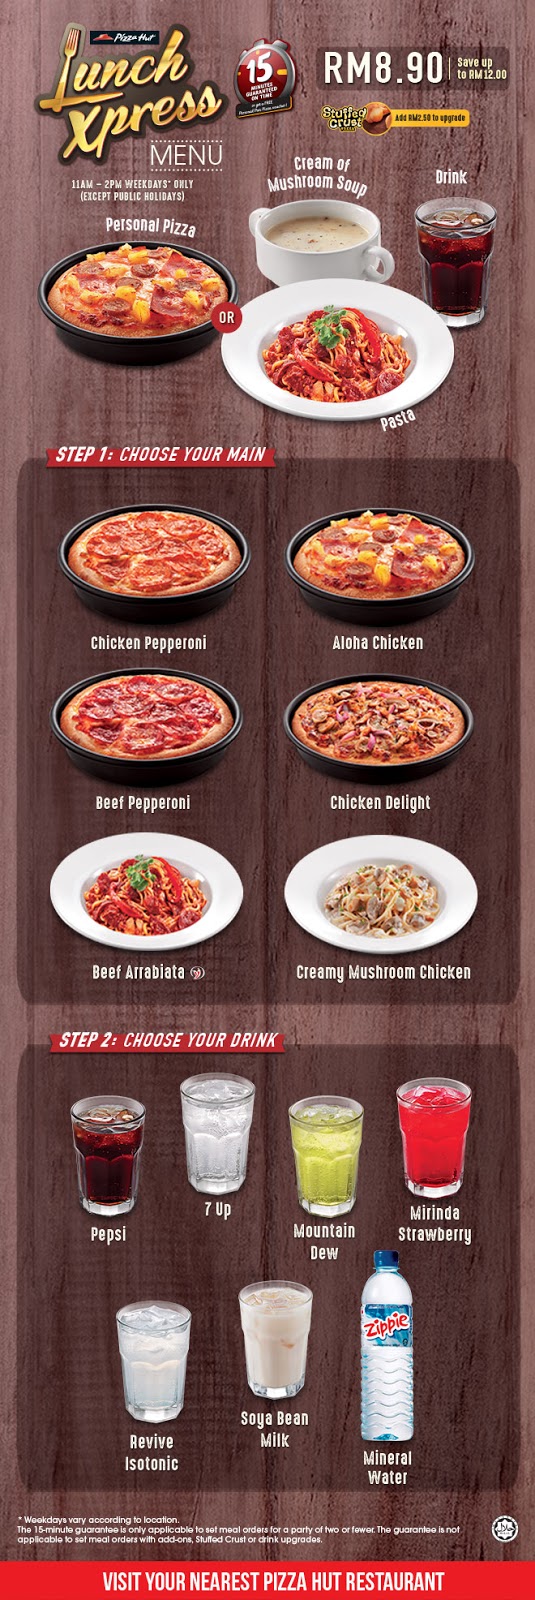 Pizza Hut Lunch Xpress Menu Rm8 90 Up To Rm12 Discount Weekdays 11am 2pm